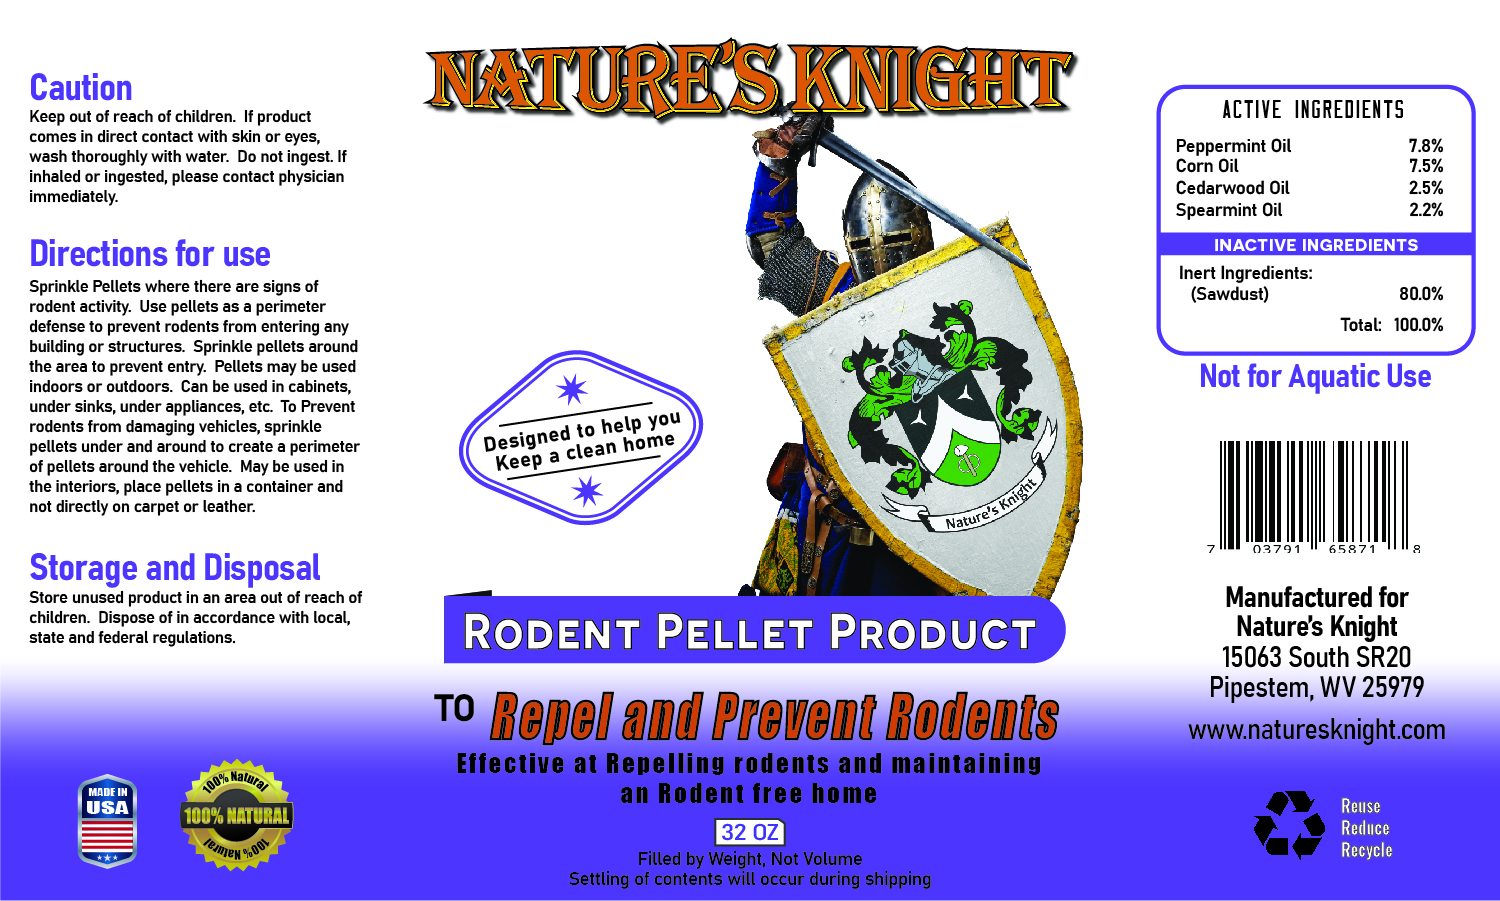 Rodent Pellet Product